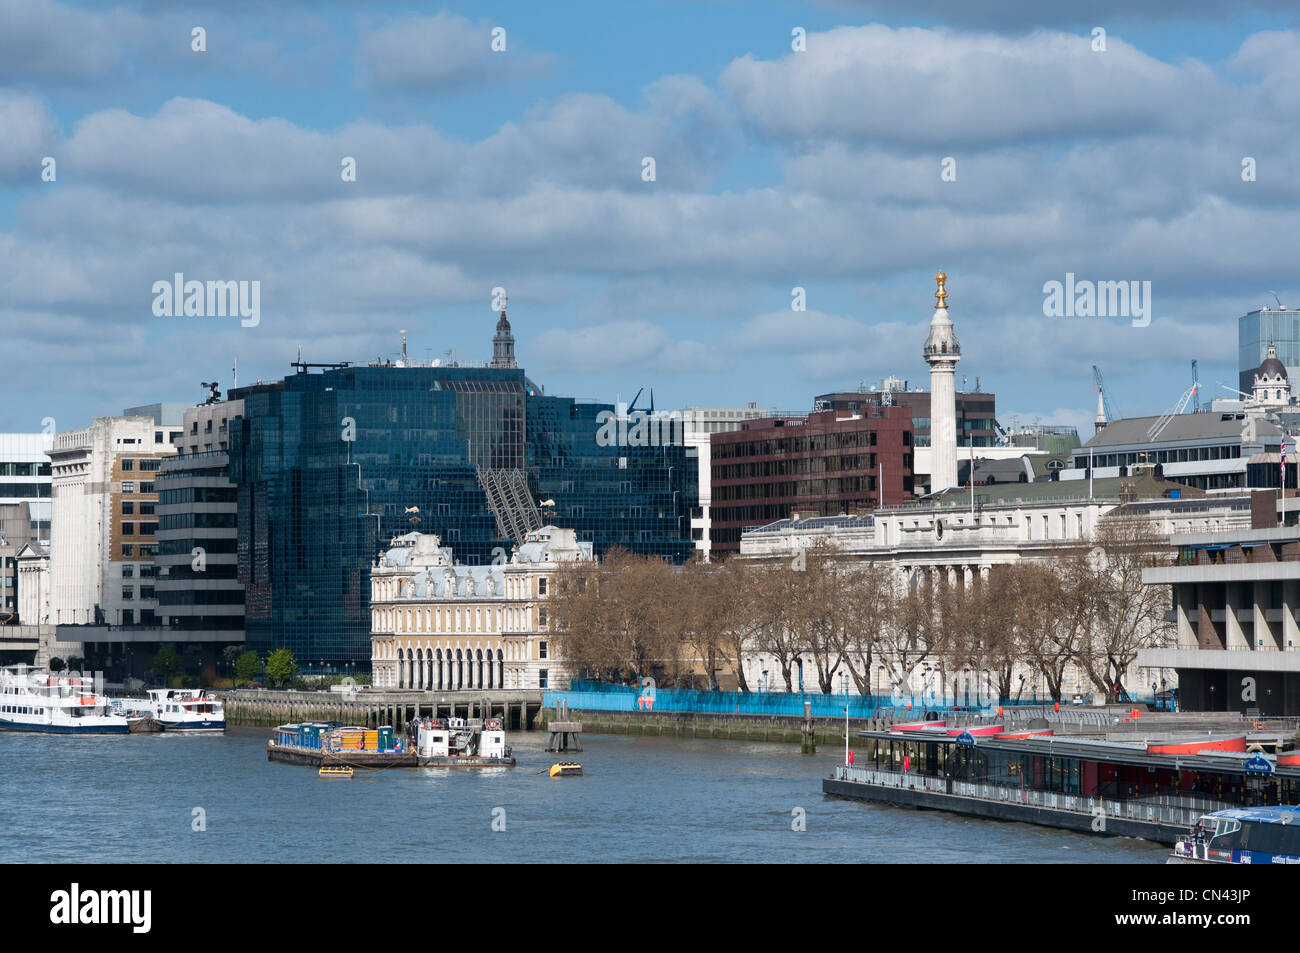 The north bank of the river Thames near the City of London. View from Tower Bridge. Stock Photo